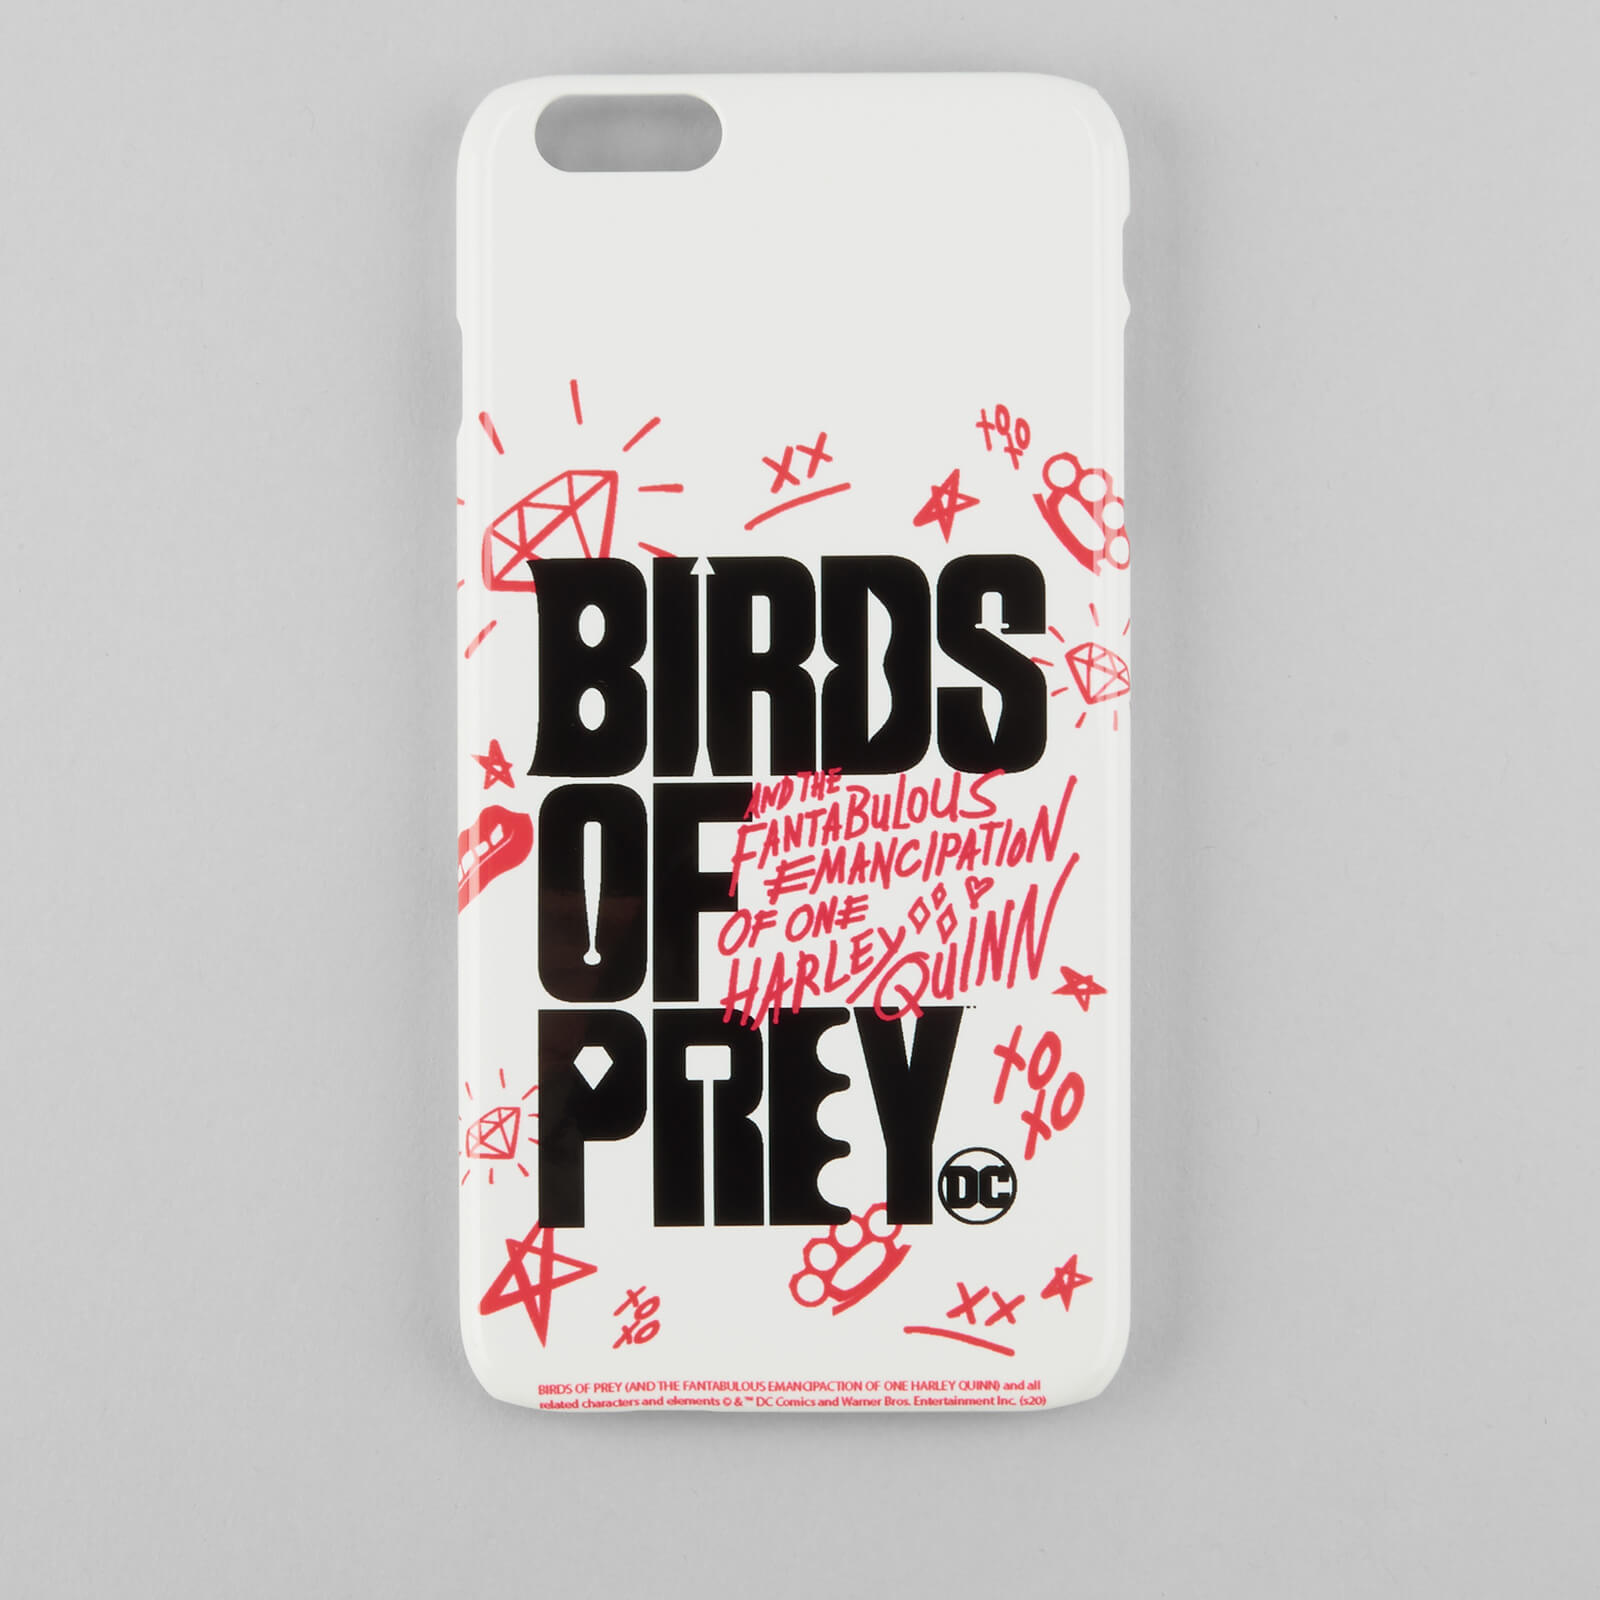 Birds of Prey Birds Of Prey Logo Phone Case for iPhone and Android - iPhone 7 Plus - Snap Case - Matte